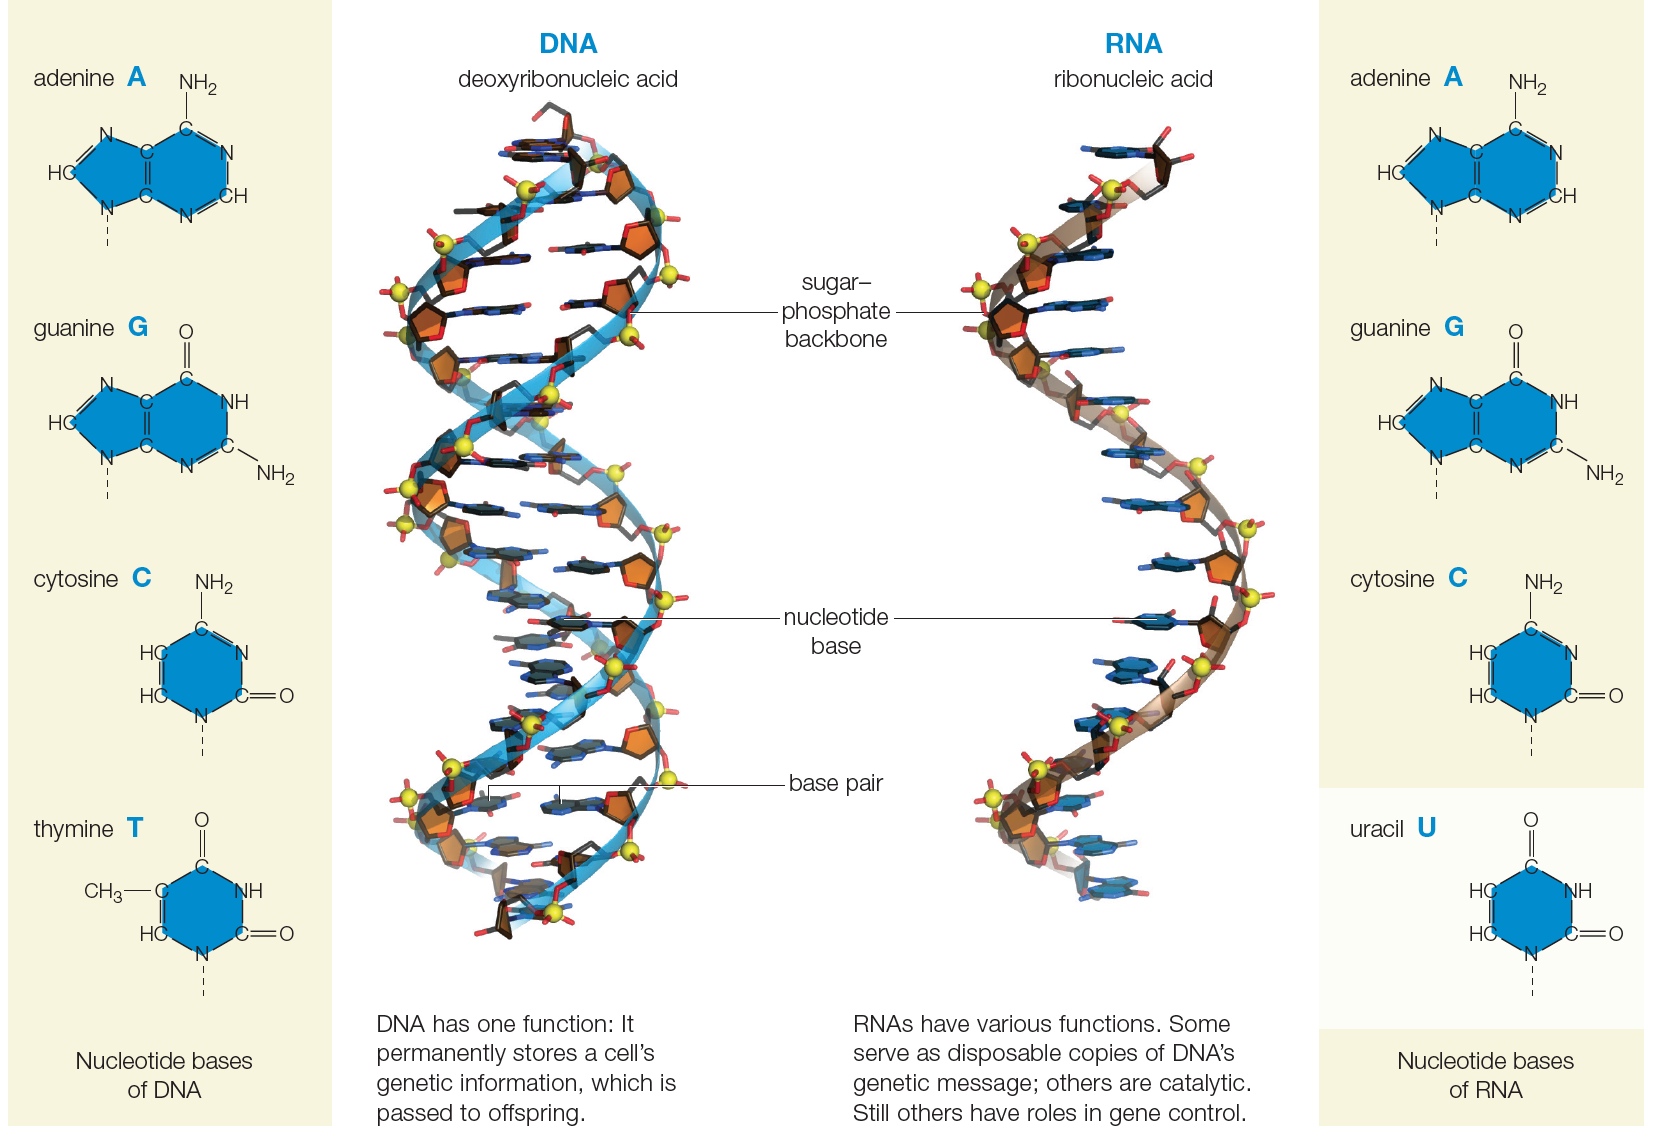 DNA and RNA compared